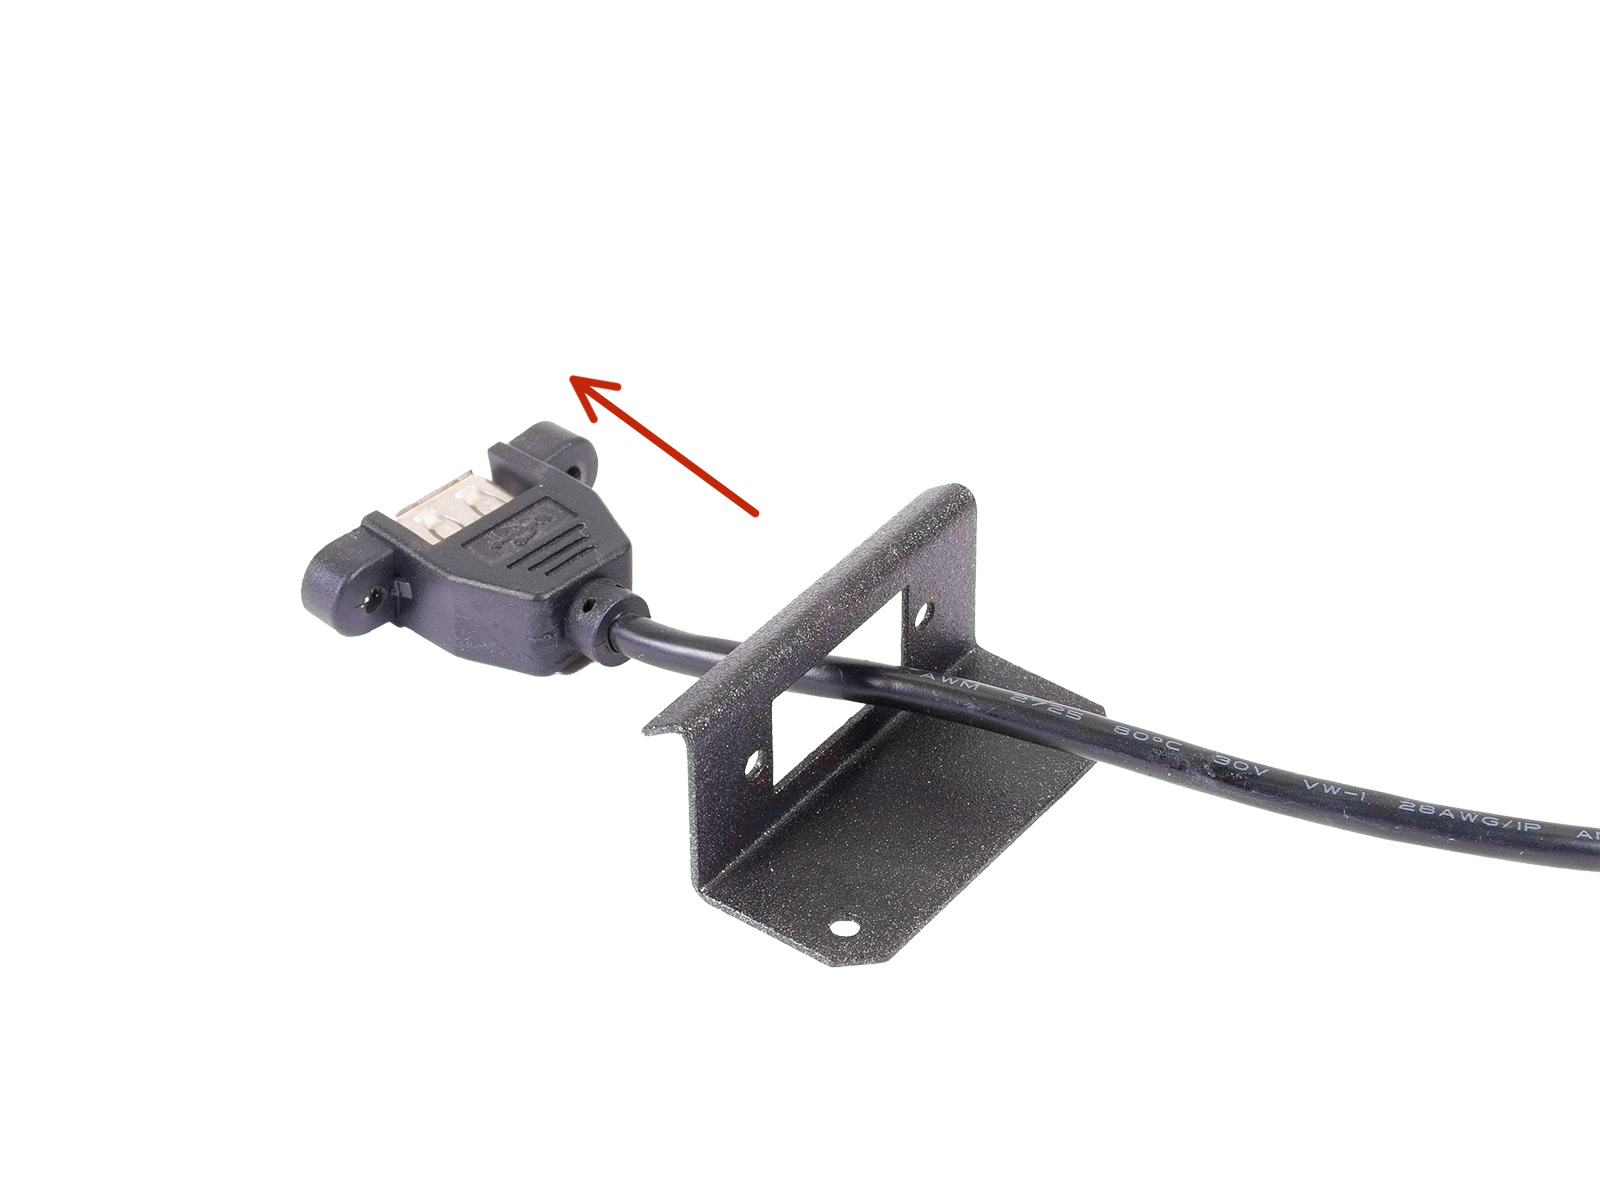 Disassembling the USB connector (Version 1.0)